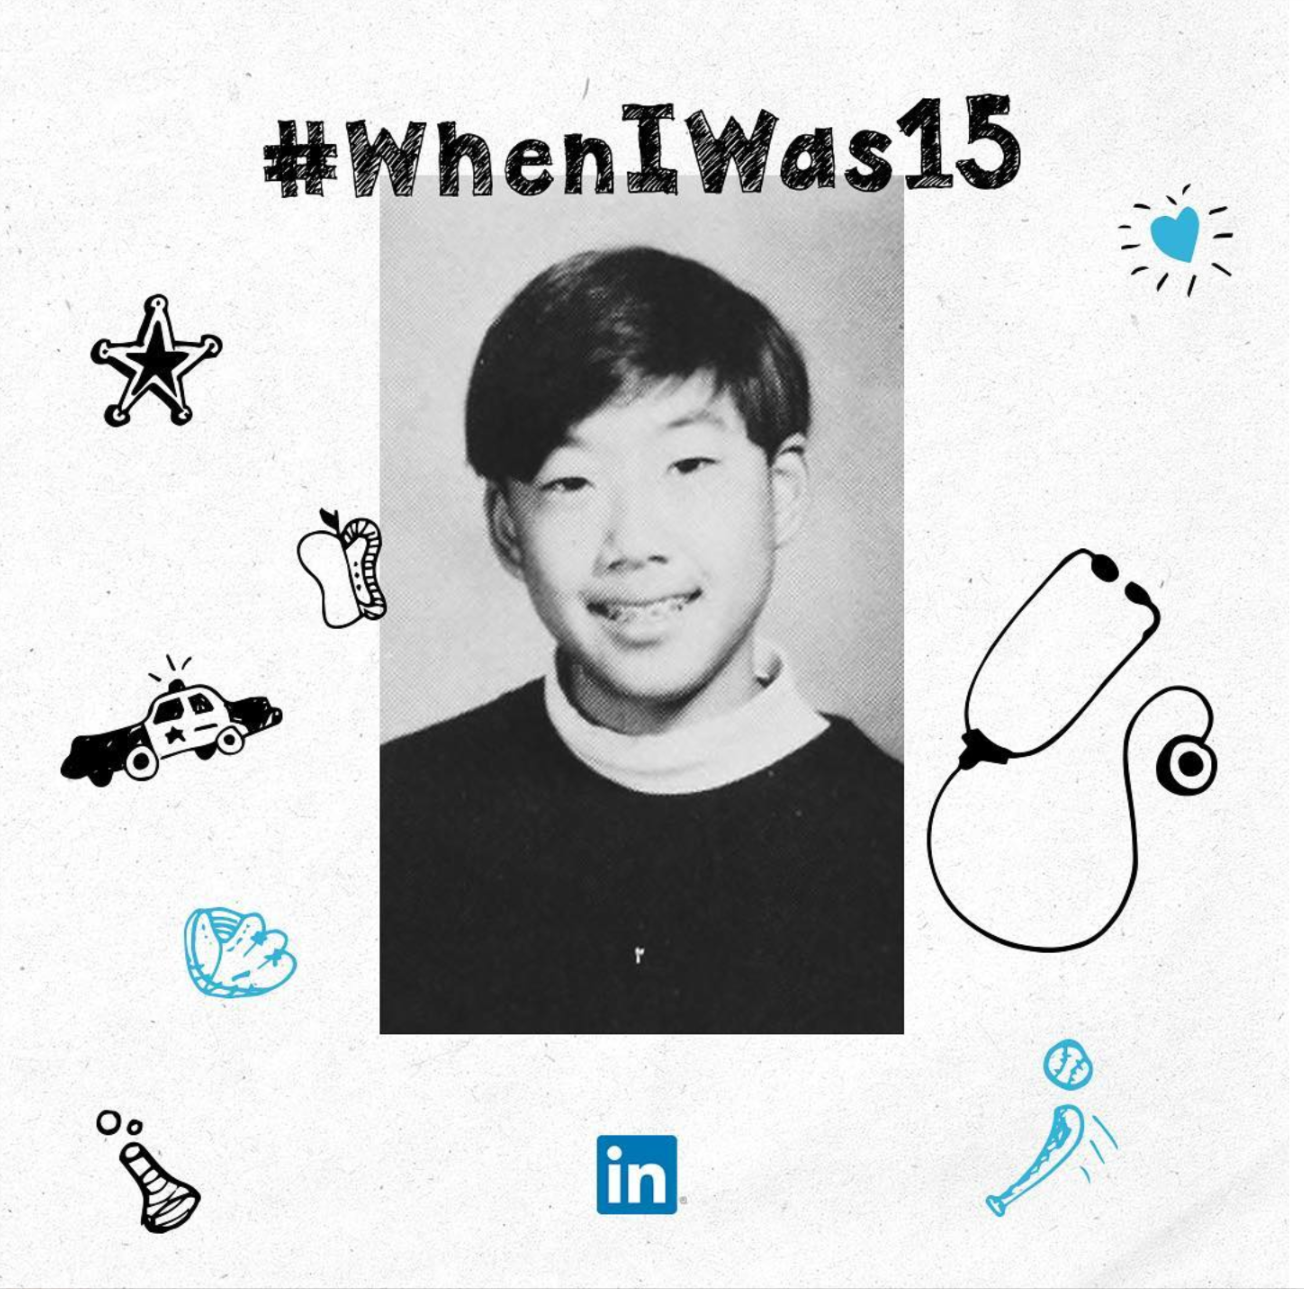 ENTITY shares LinkedIn profile tips. High school yearbook photo with hashtag "#WhenIWas15."